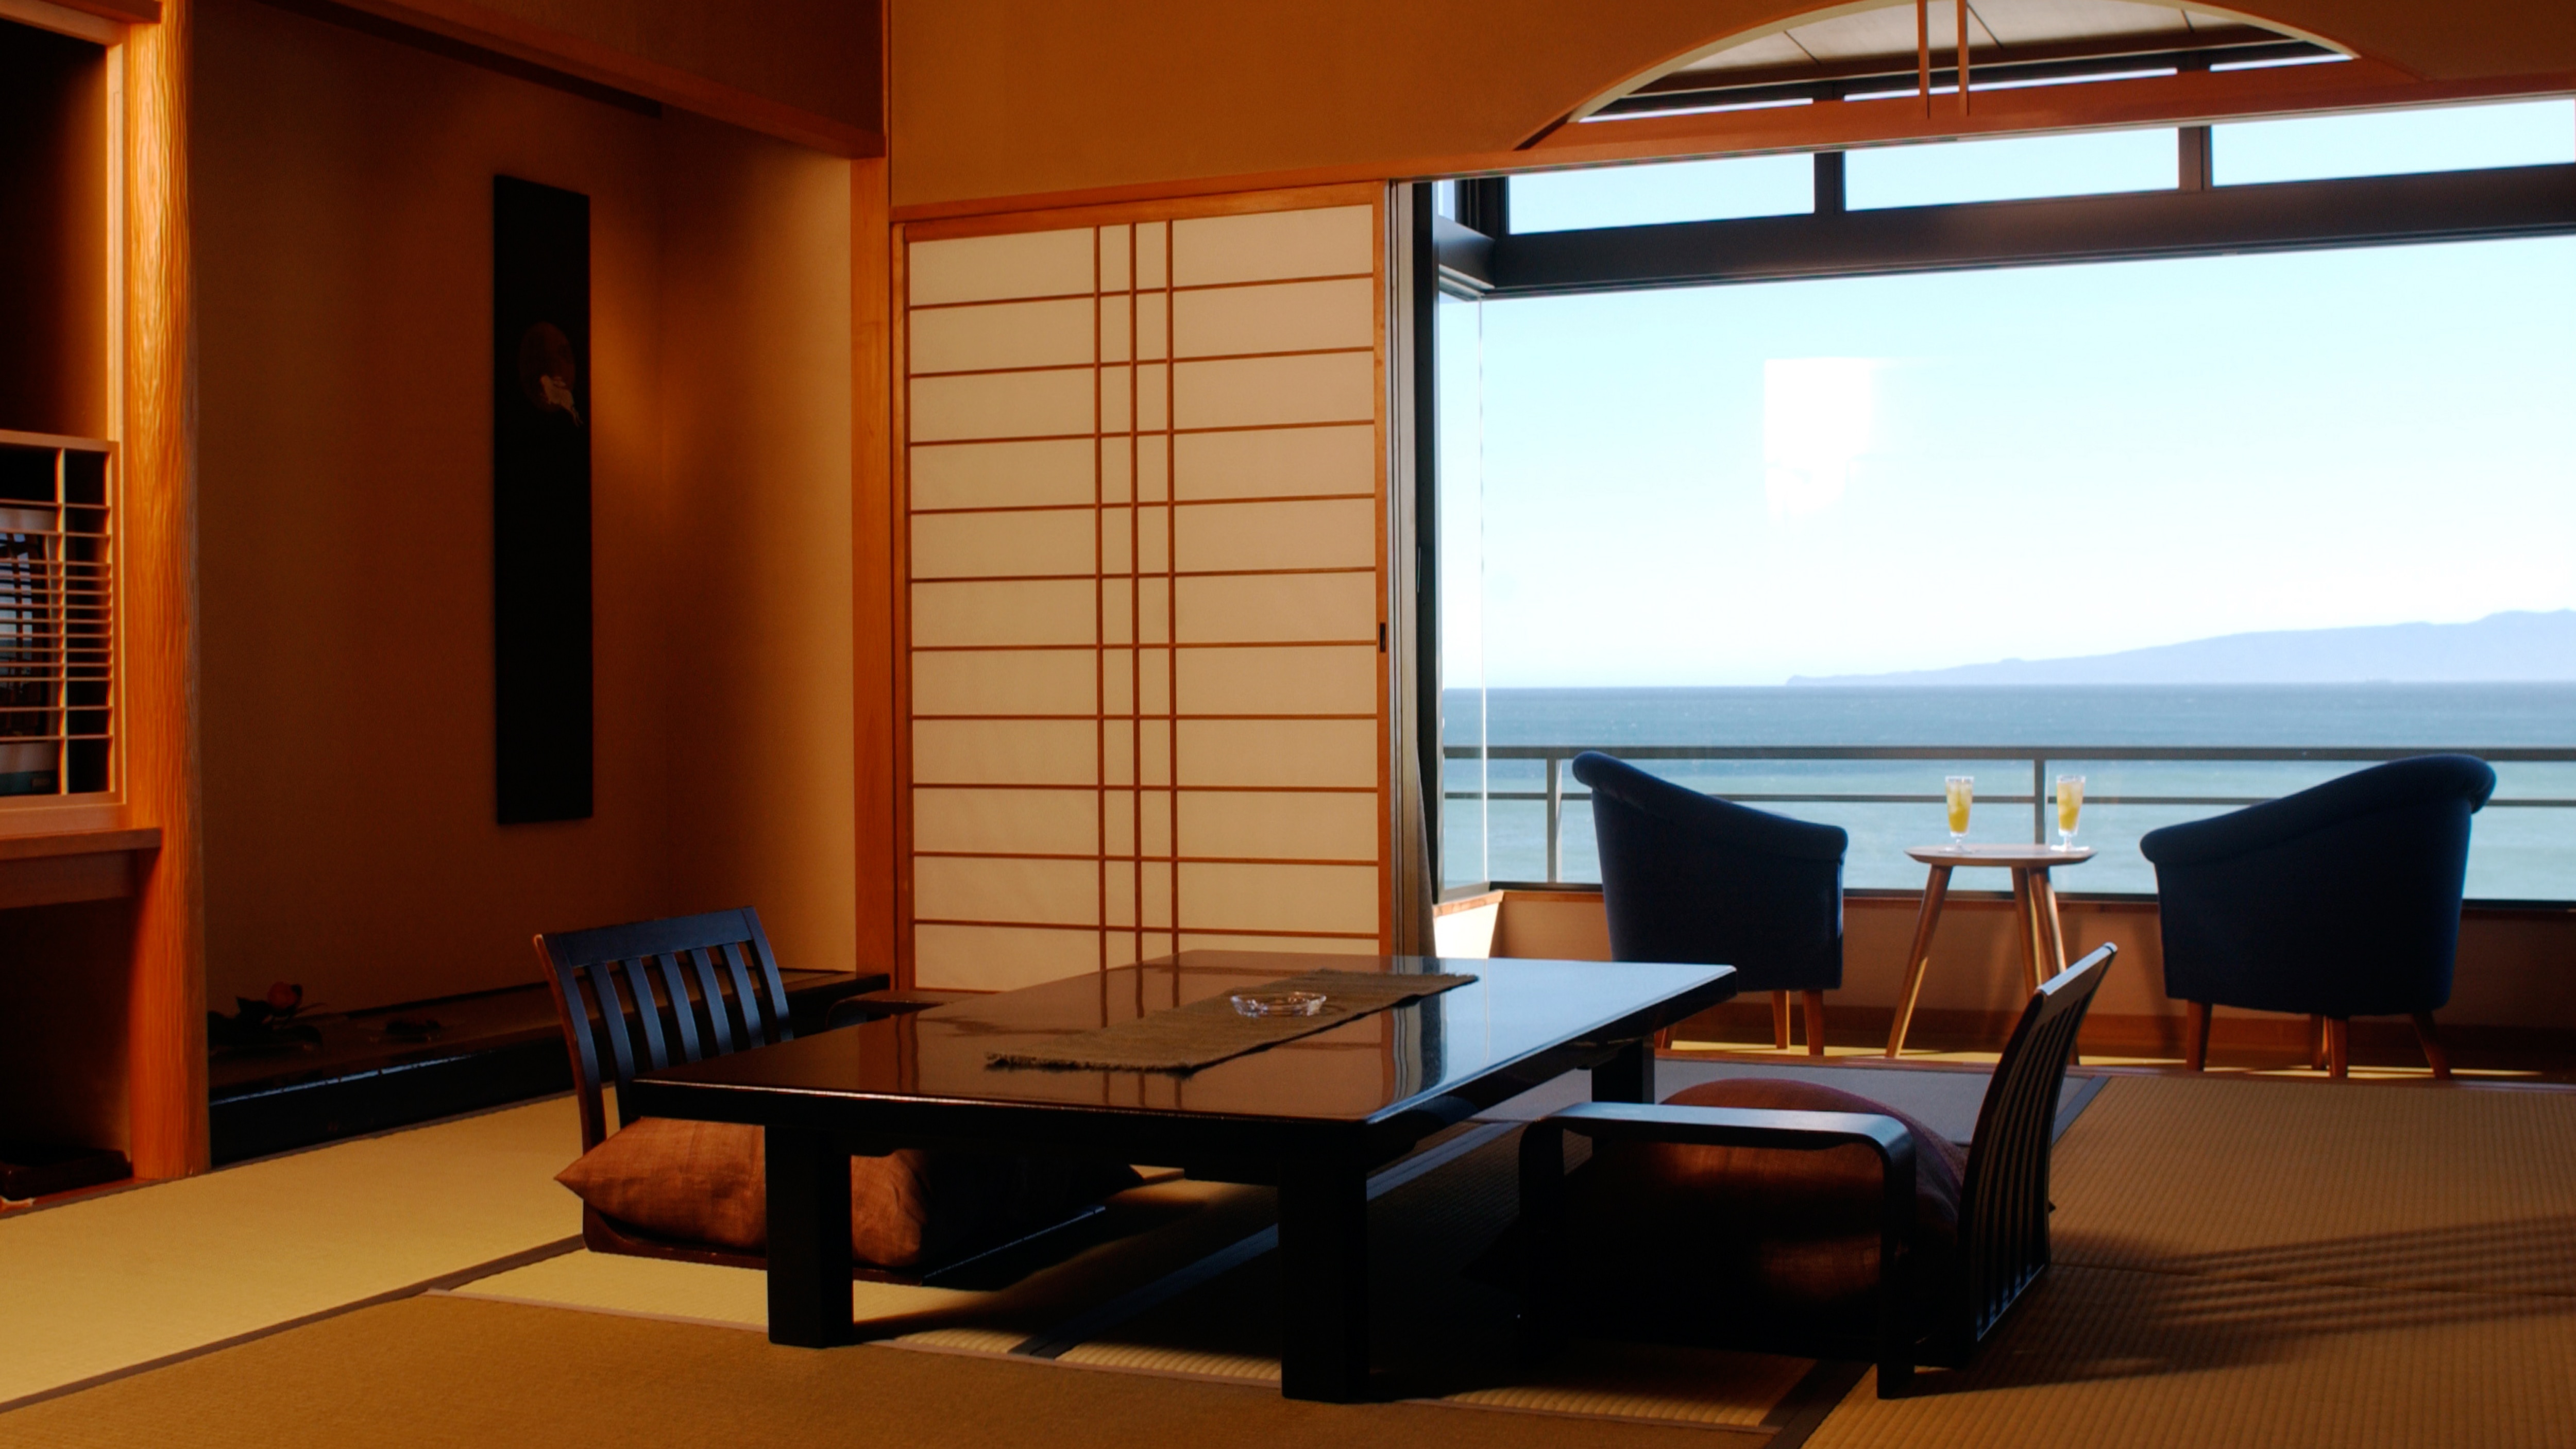 7th floor on the top floor / 10 tatami Japanese-style room with a spectacular view of Oshima and the sea + wide rim